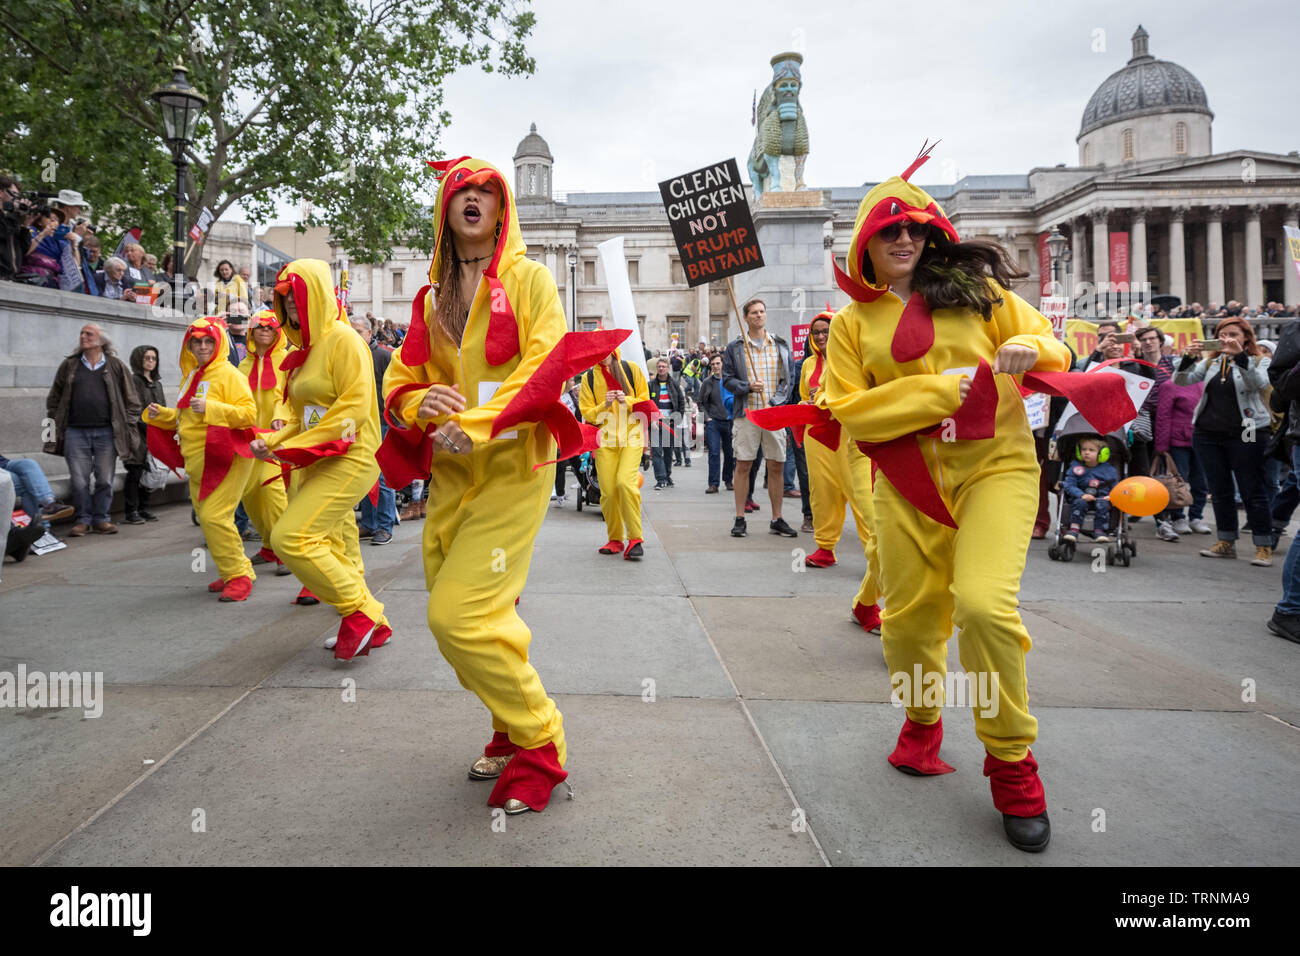 Chlorinated Chicken dancers perform in Trafalgar Square as part of the protests against US president Donald Trump's UK state visit. Stock Photo